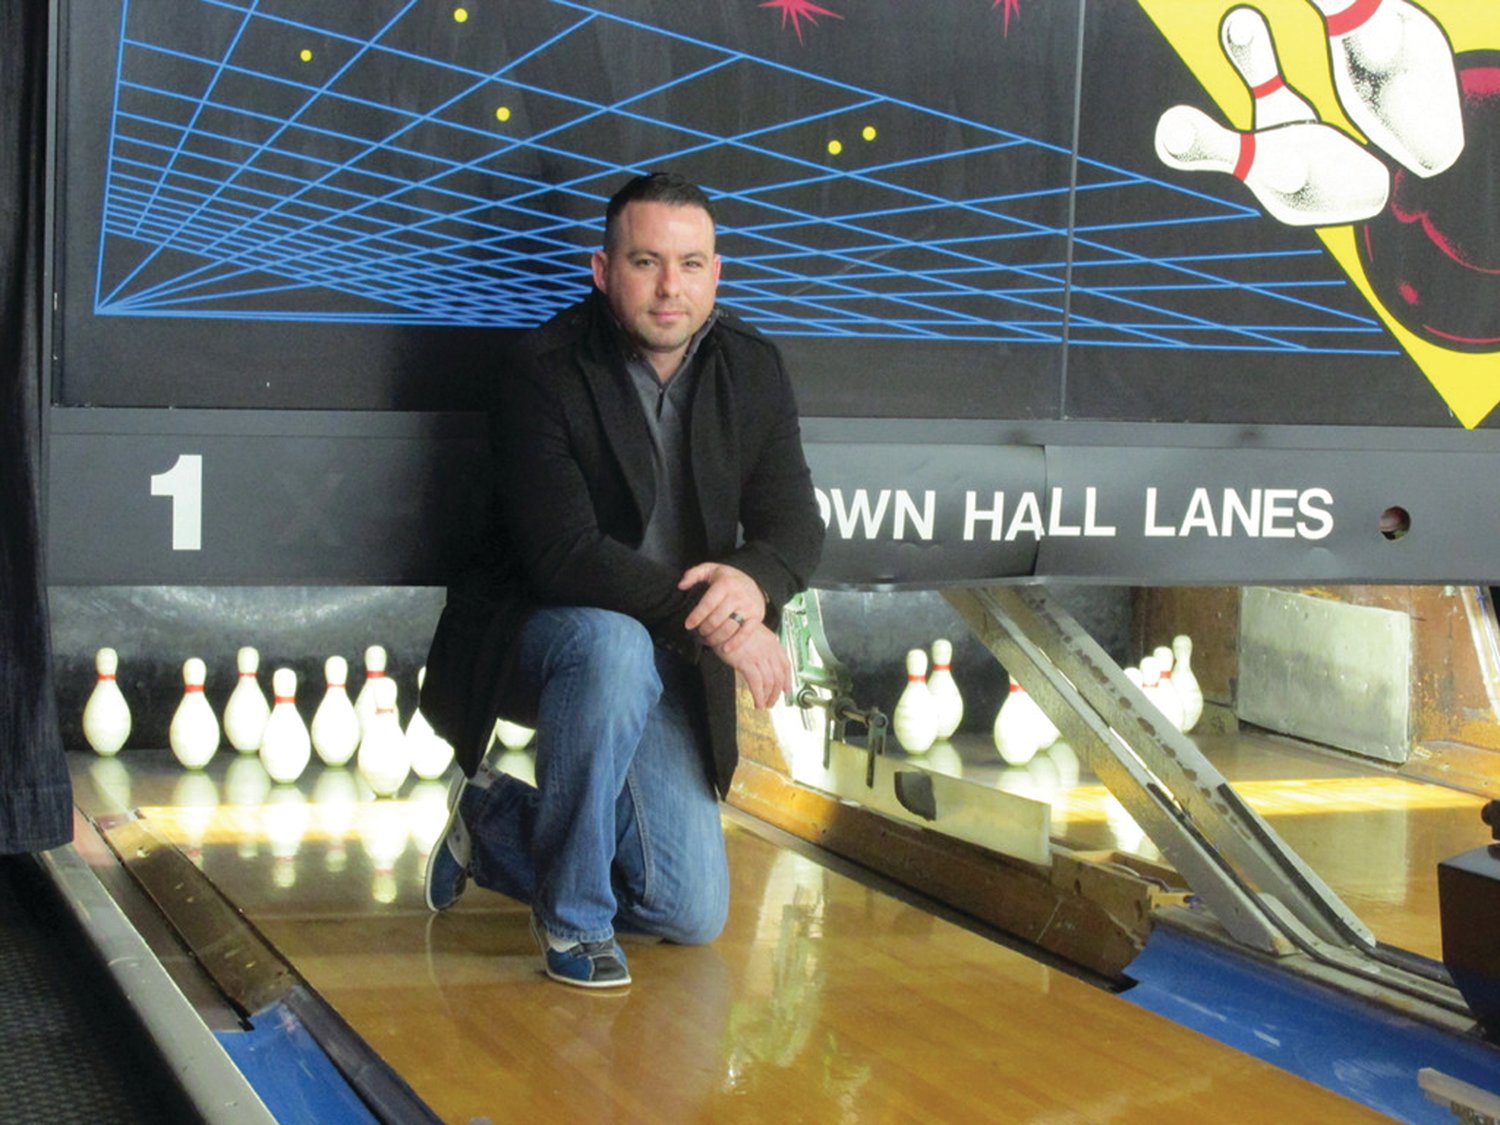 BIDDING FAREWELL: Rich Fraielli, who worked as the manager of Town Hall Lanes in Johnston for four years, bought the business from Frank Ferri in 2015.